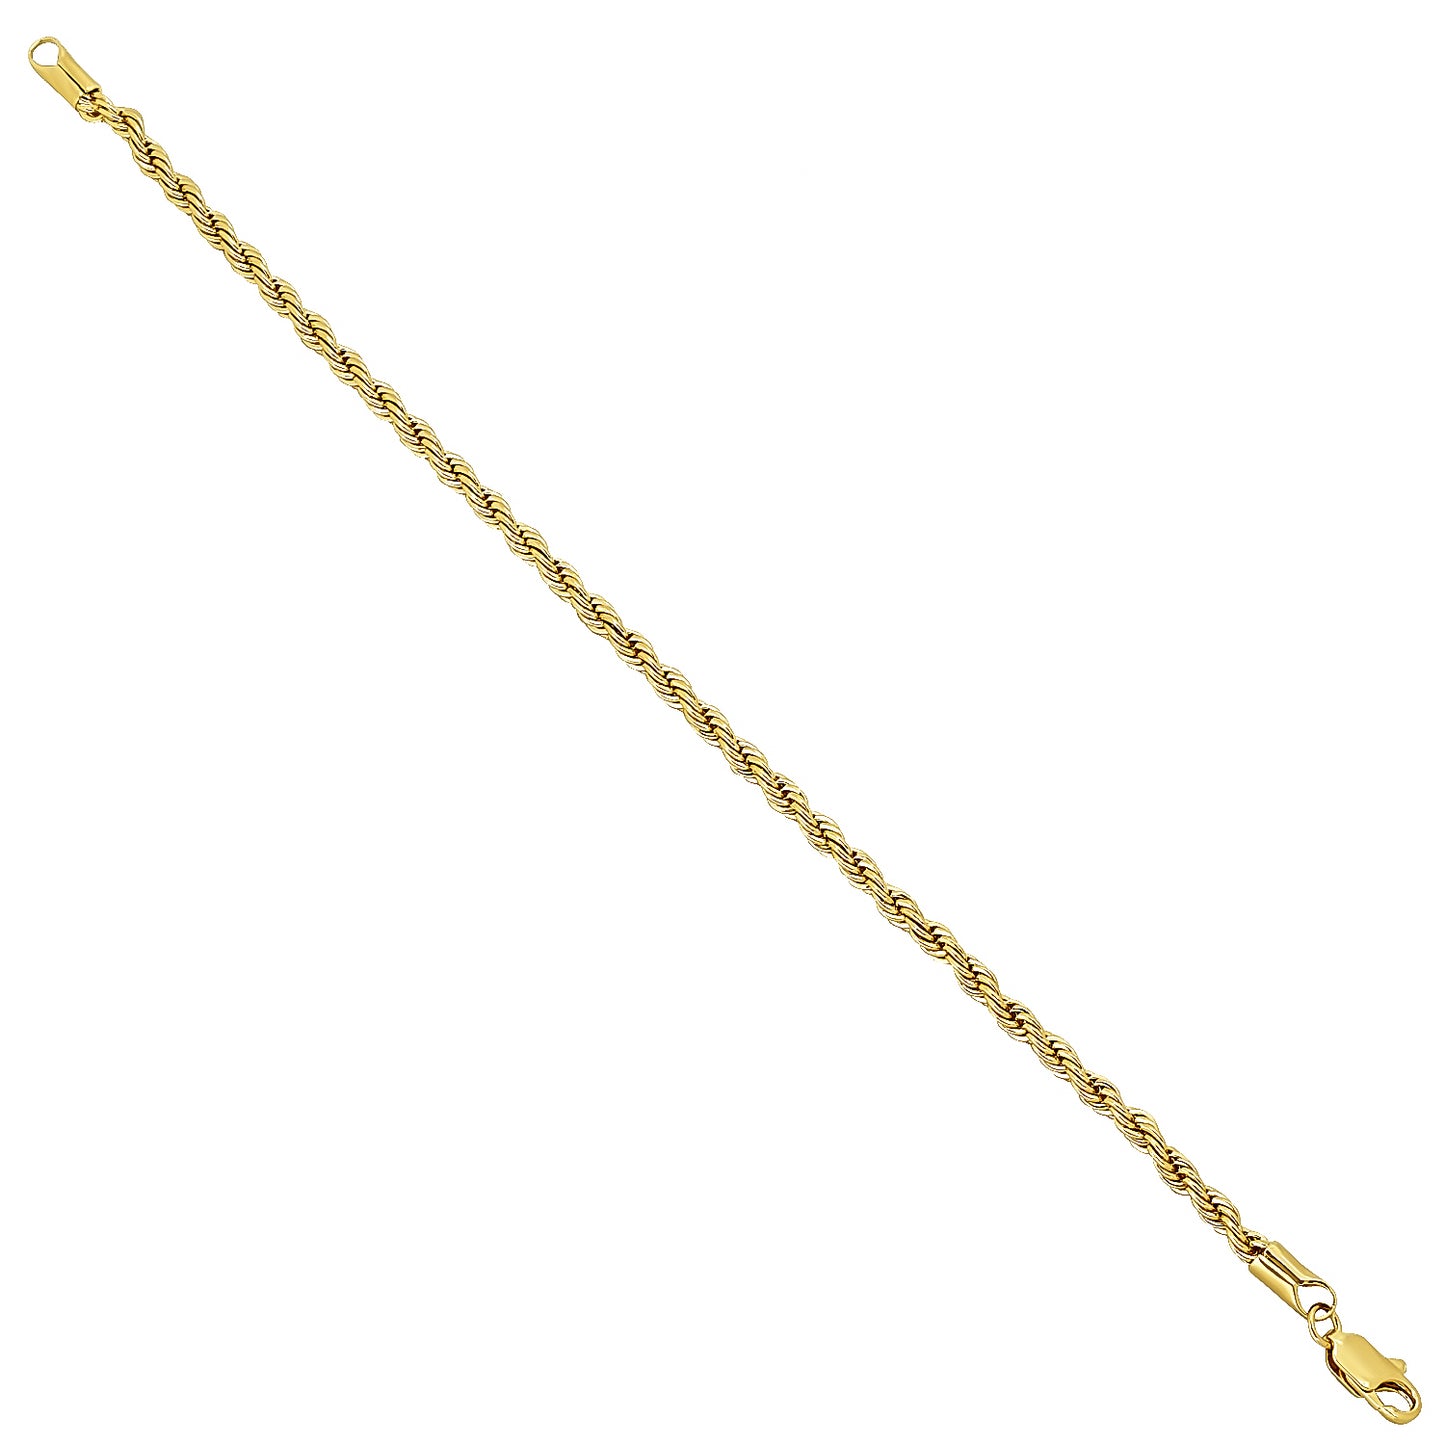 3.5mm 14k Yellow Gold Plated Twisted Rope Chain Bracelet (SKU: GFC103B)